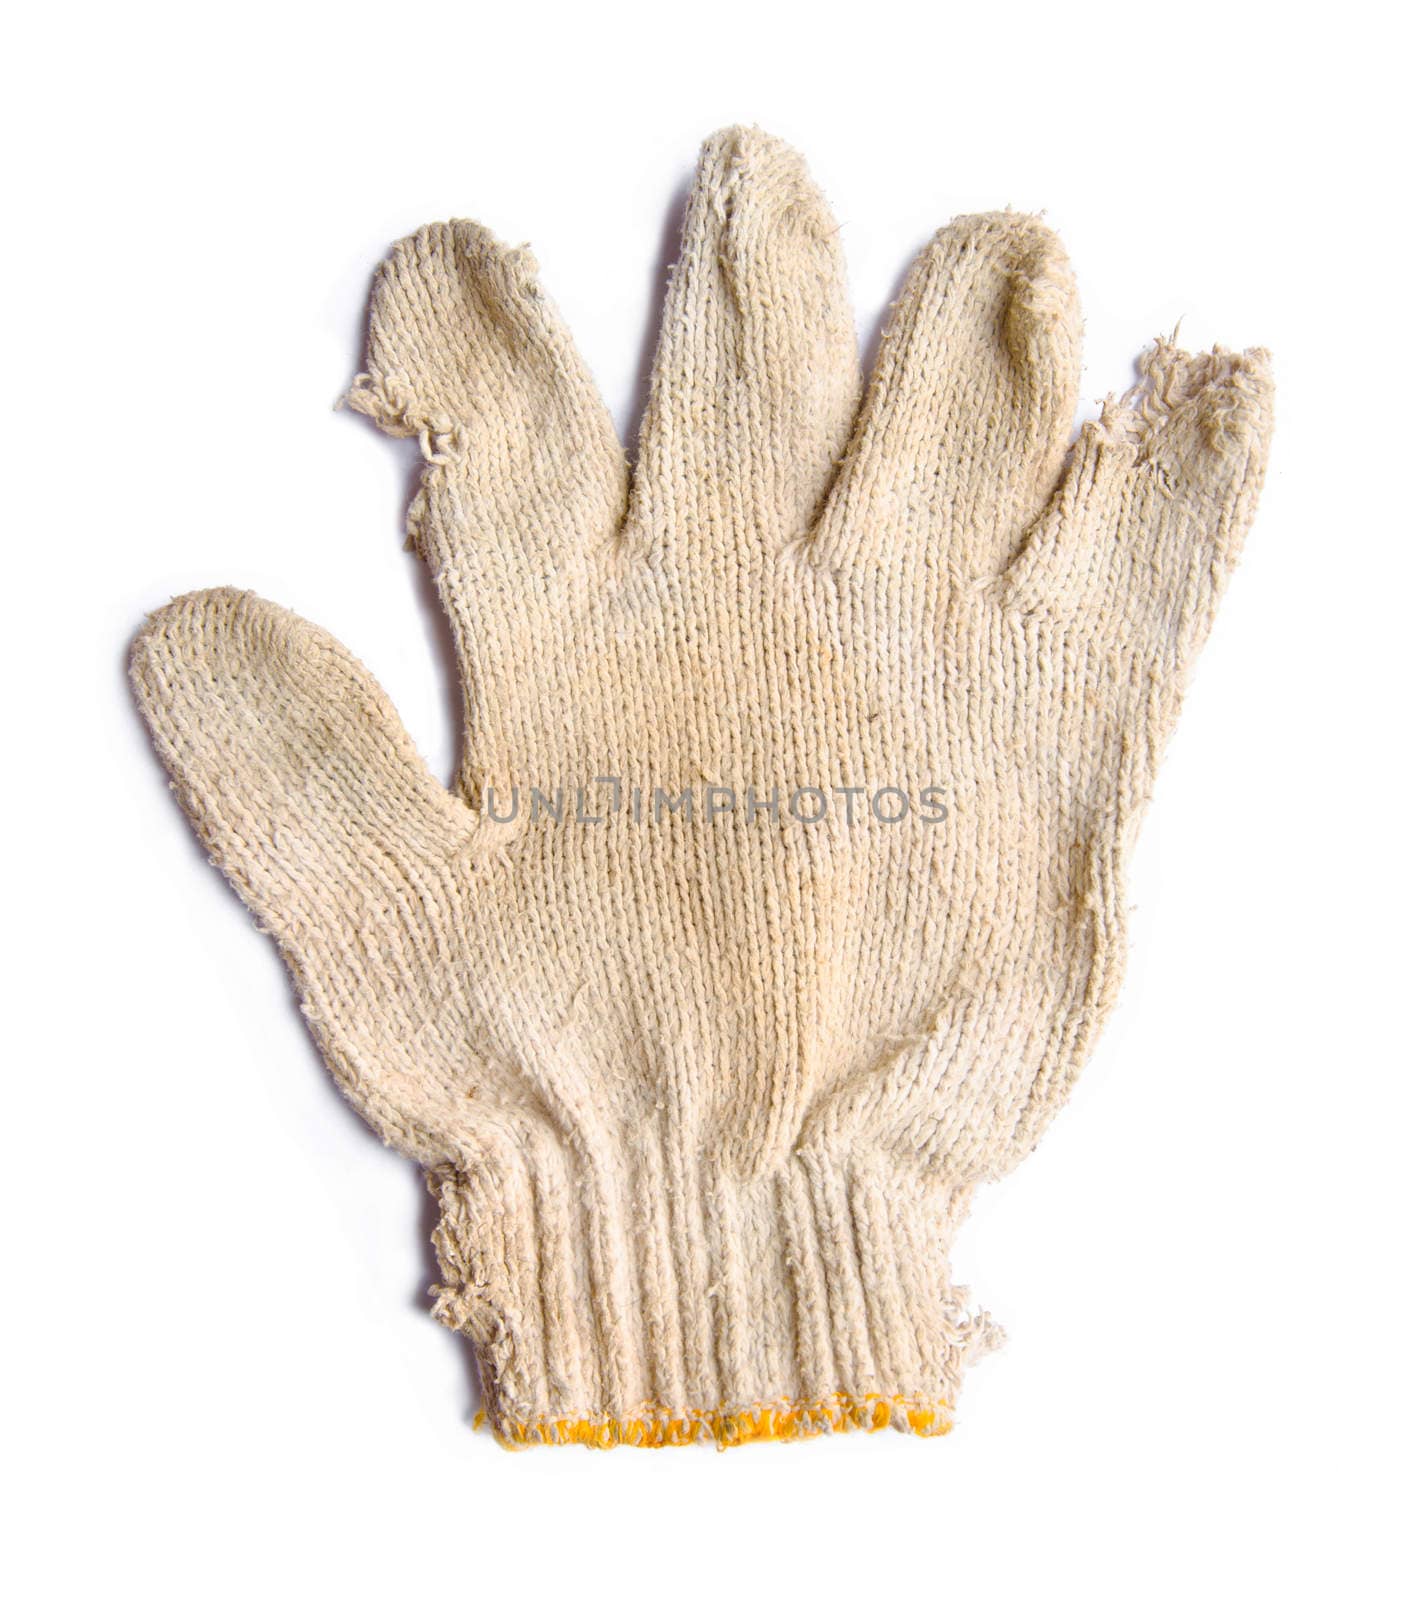 lack gloves fabric garbage isolated on white background